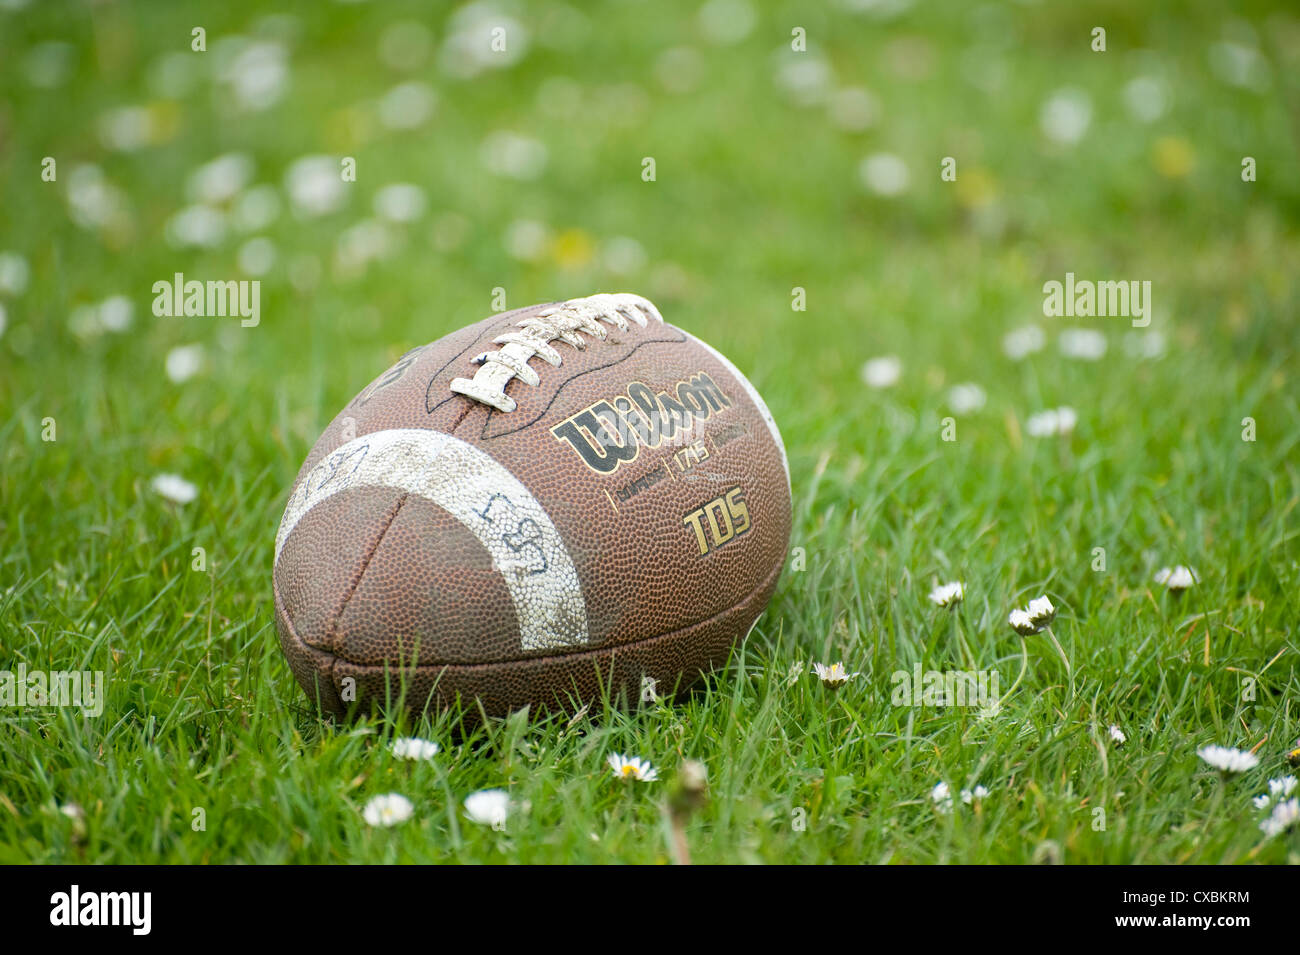 American Football sitting in green grass [copy space] with white daisy flowers. Juxtaposition and contrast of ideas within image Stock Photo